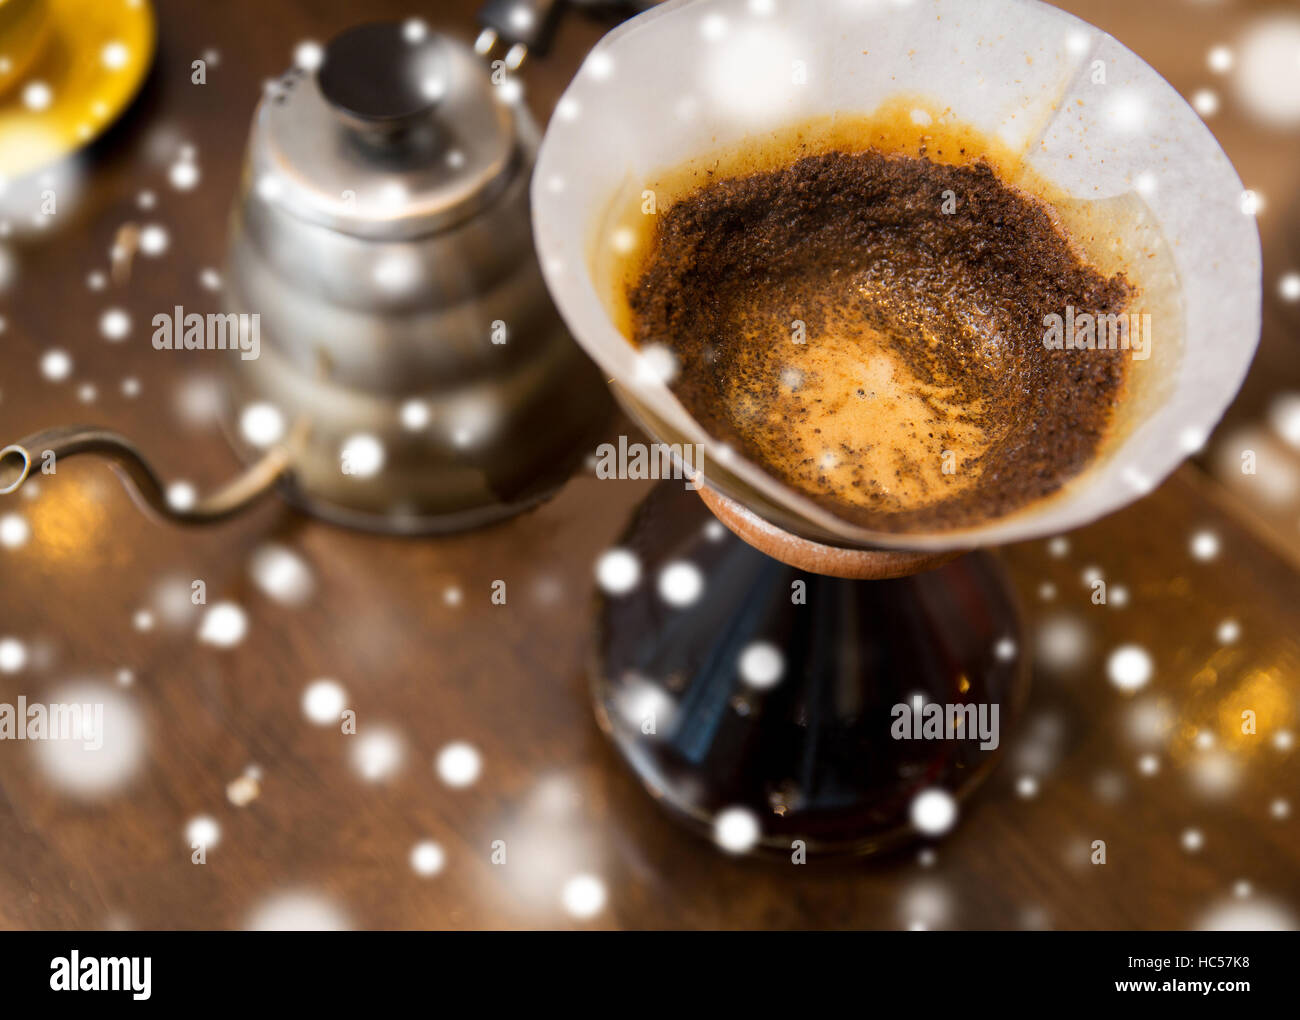 close up of coffeemaker and coffee pot Stock Photo